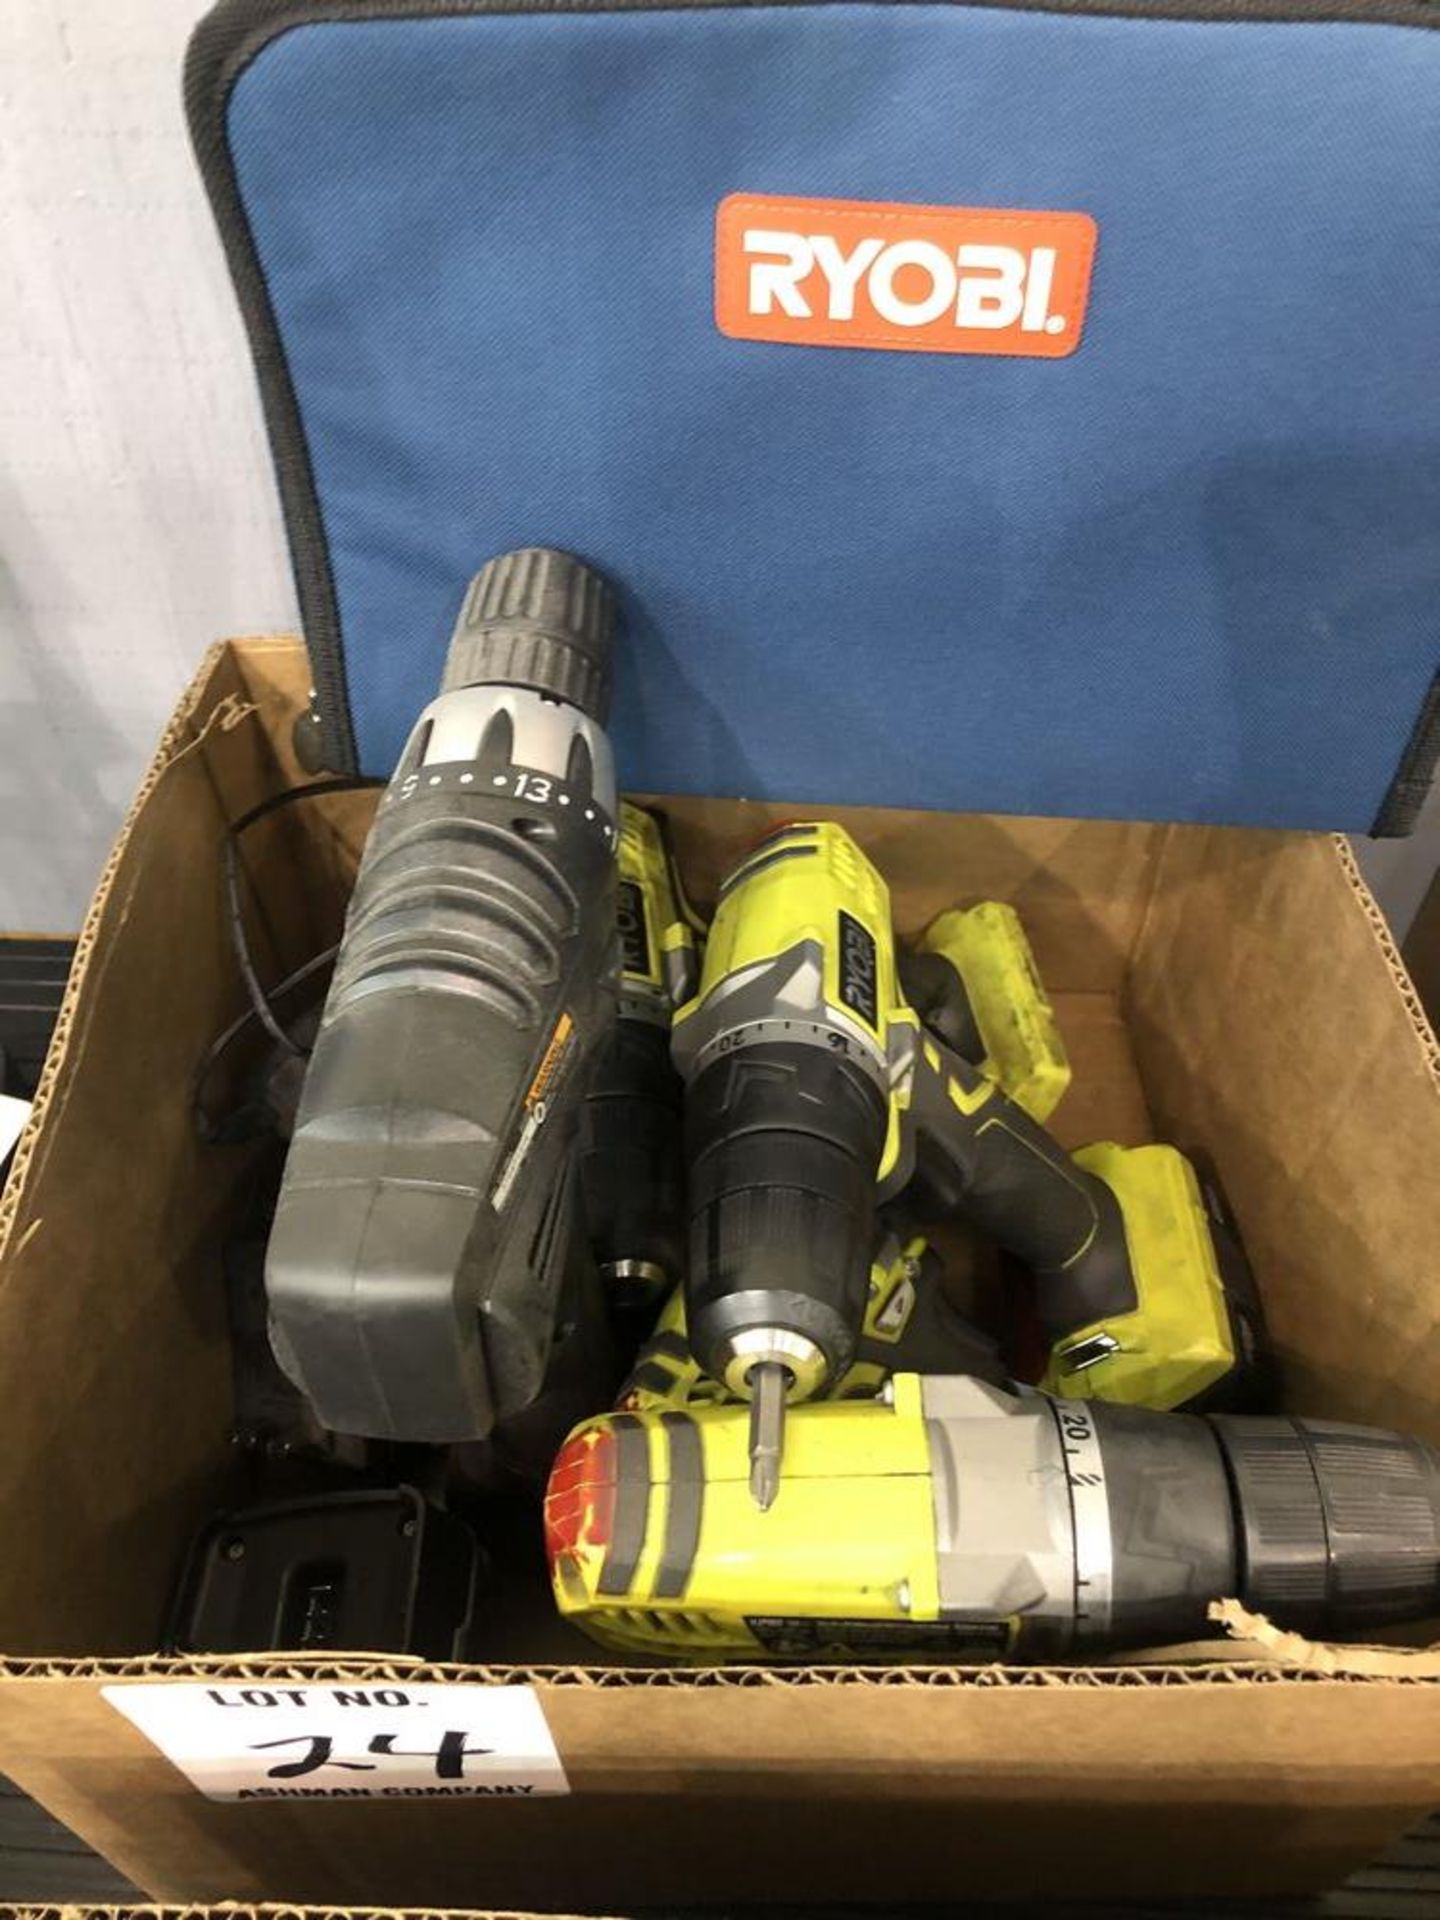 (4) electric drills with charger and battery, (3) Ryobi (1) Drill master